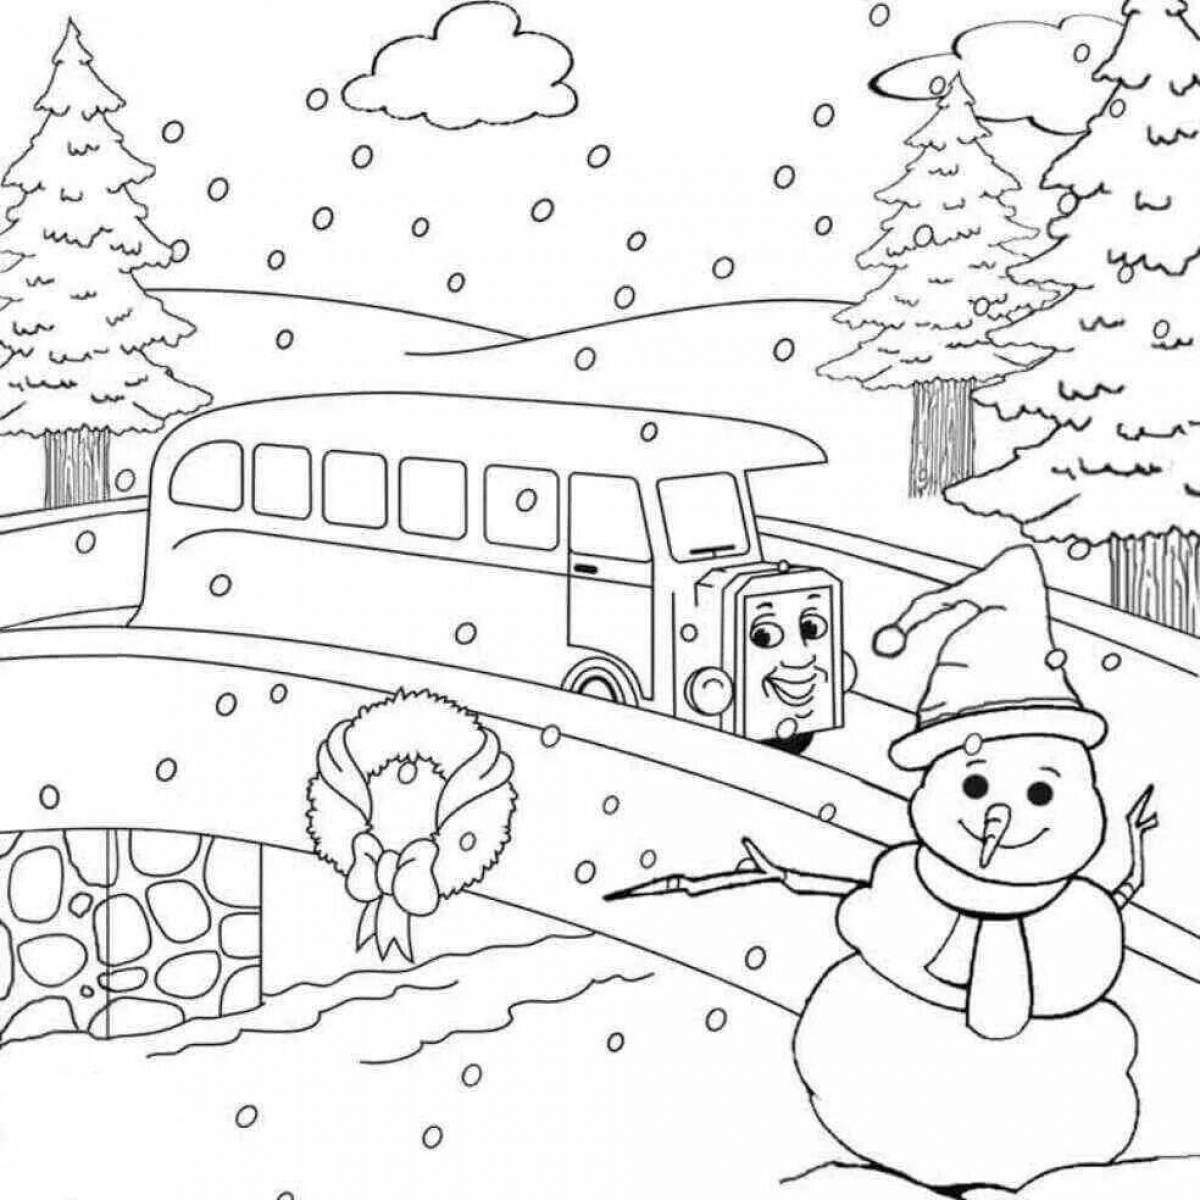 Gorgeous winter day coloring book for kids